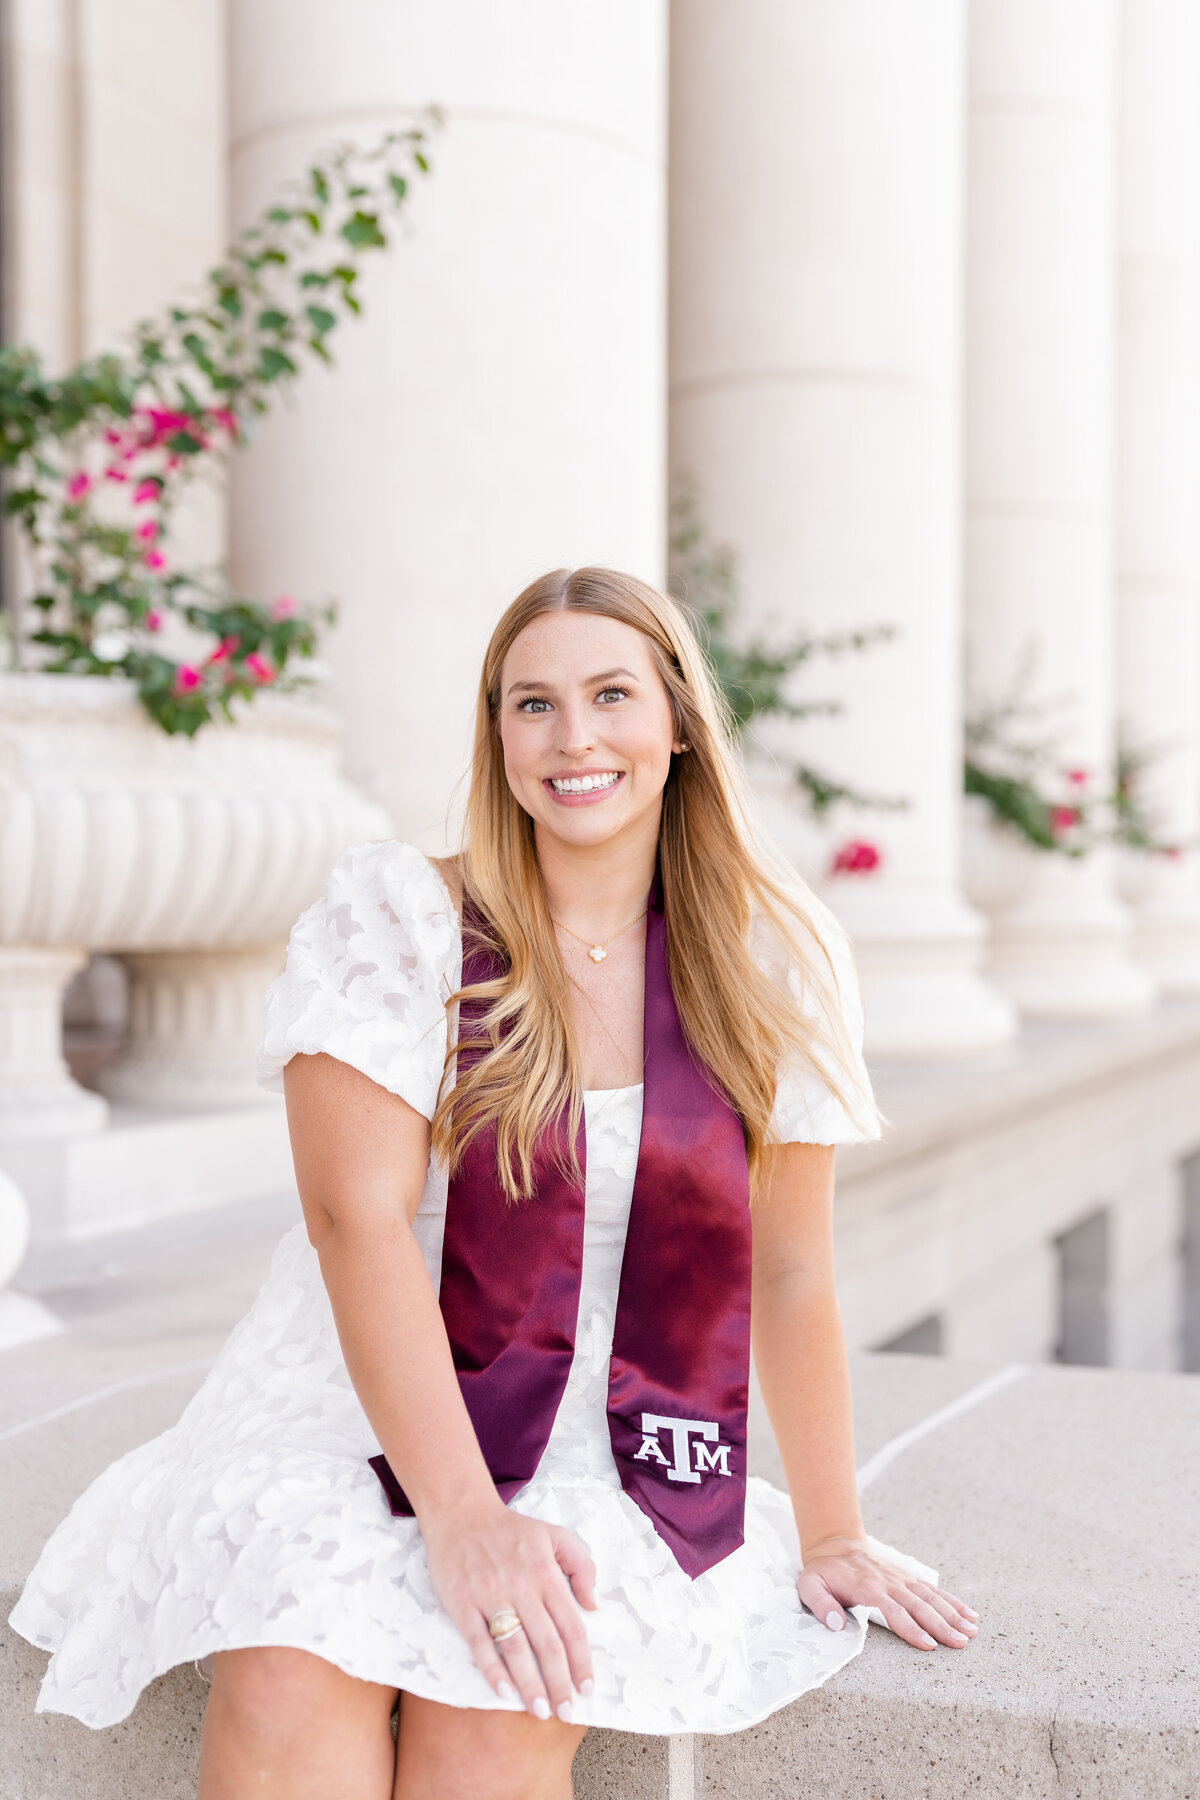 Texas A&M senior girl sitting in front of Administration Building wearing white dress and Aggie stole and smiling